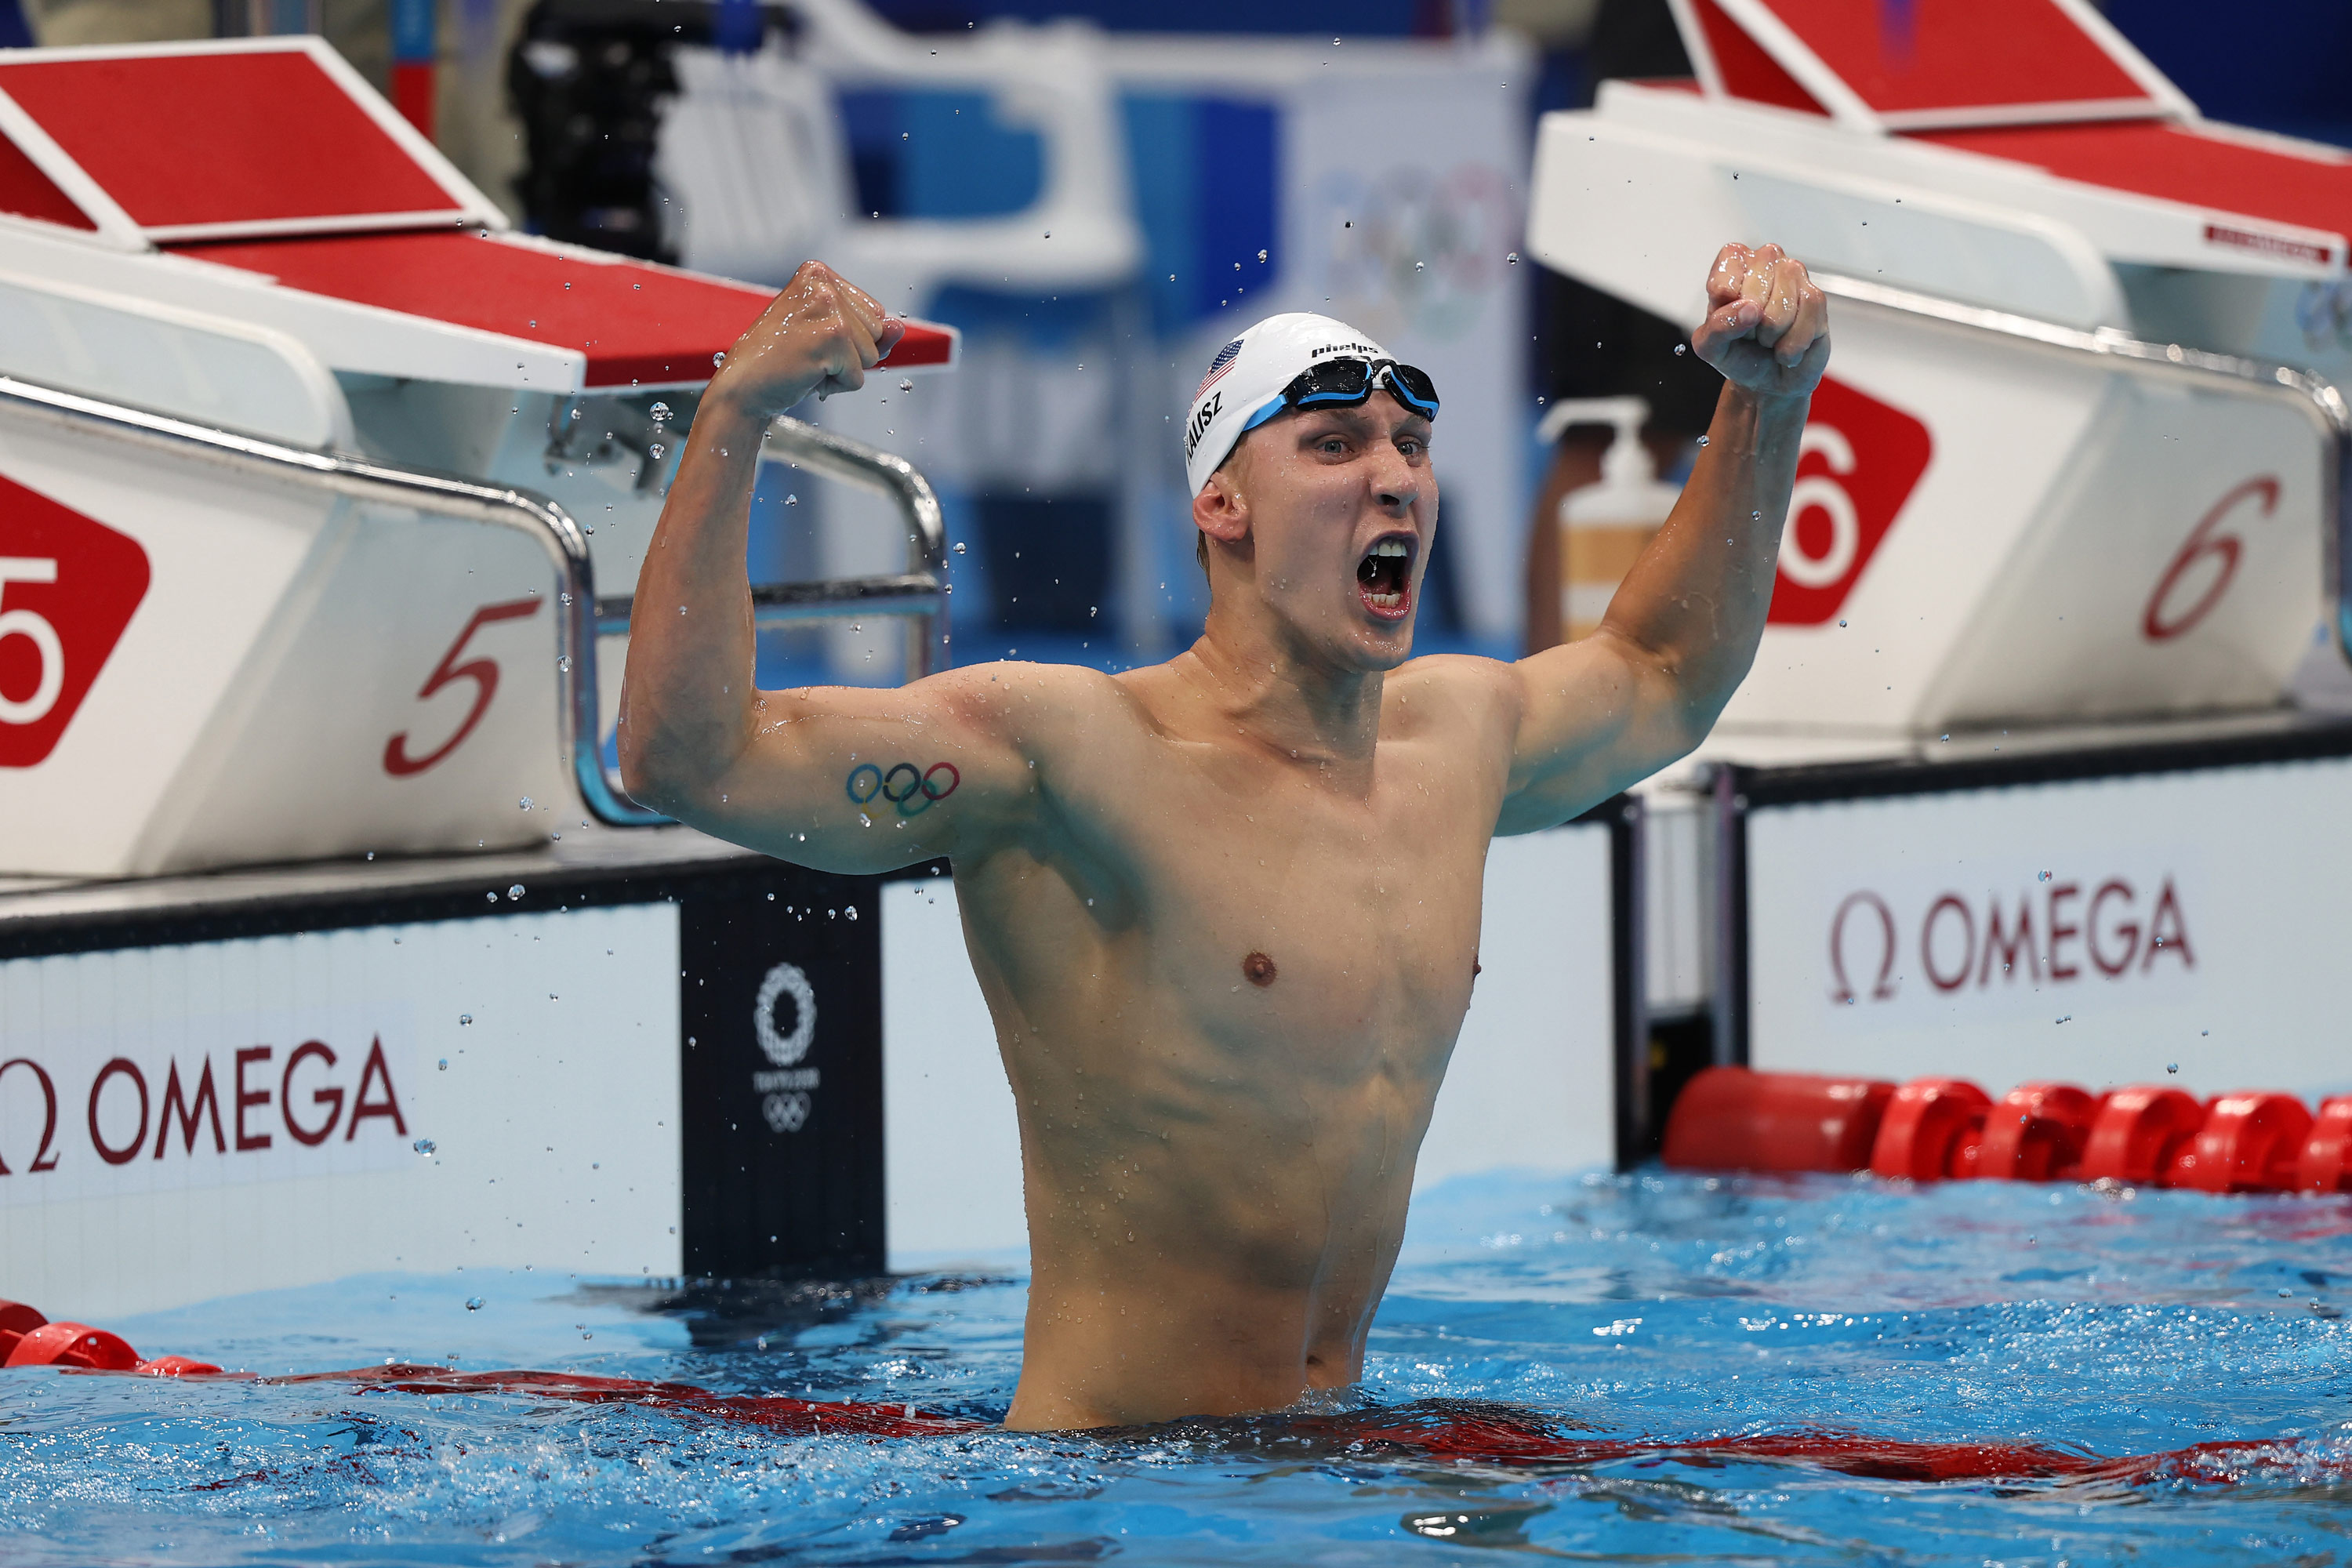 usa-wins-first-tokyo-olympics-medals-with-gold-silver-finish-in-men-s-400-meter-individual-medley